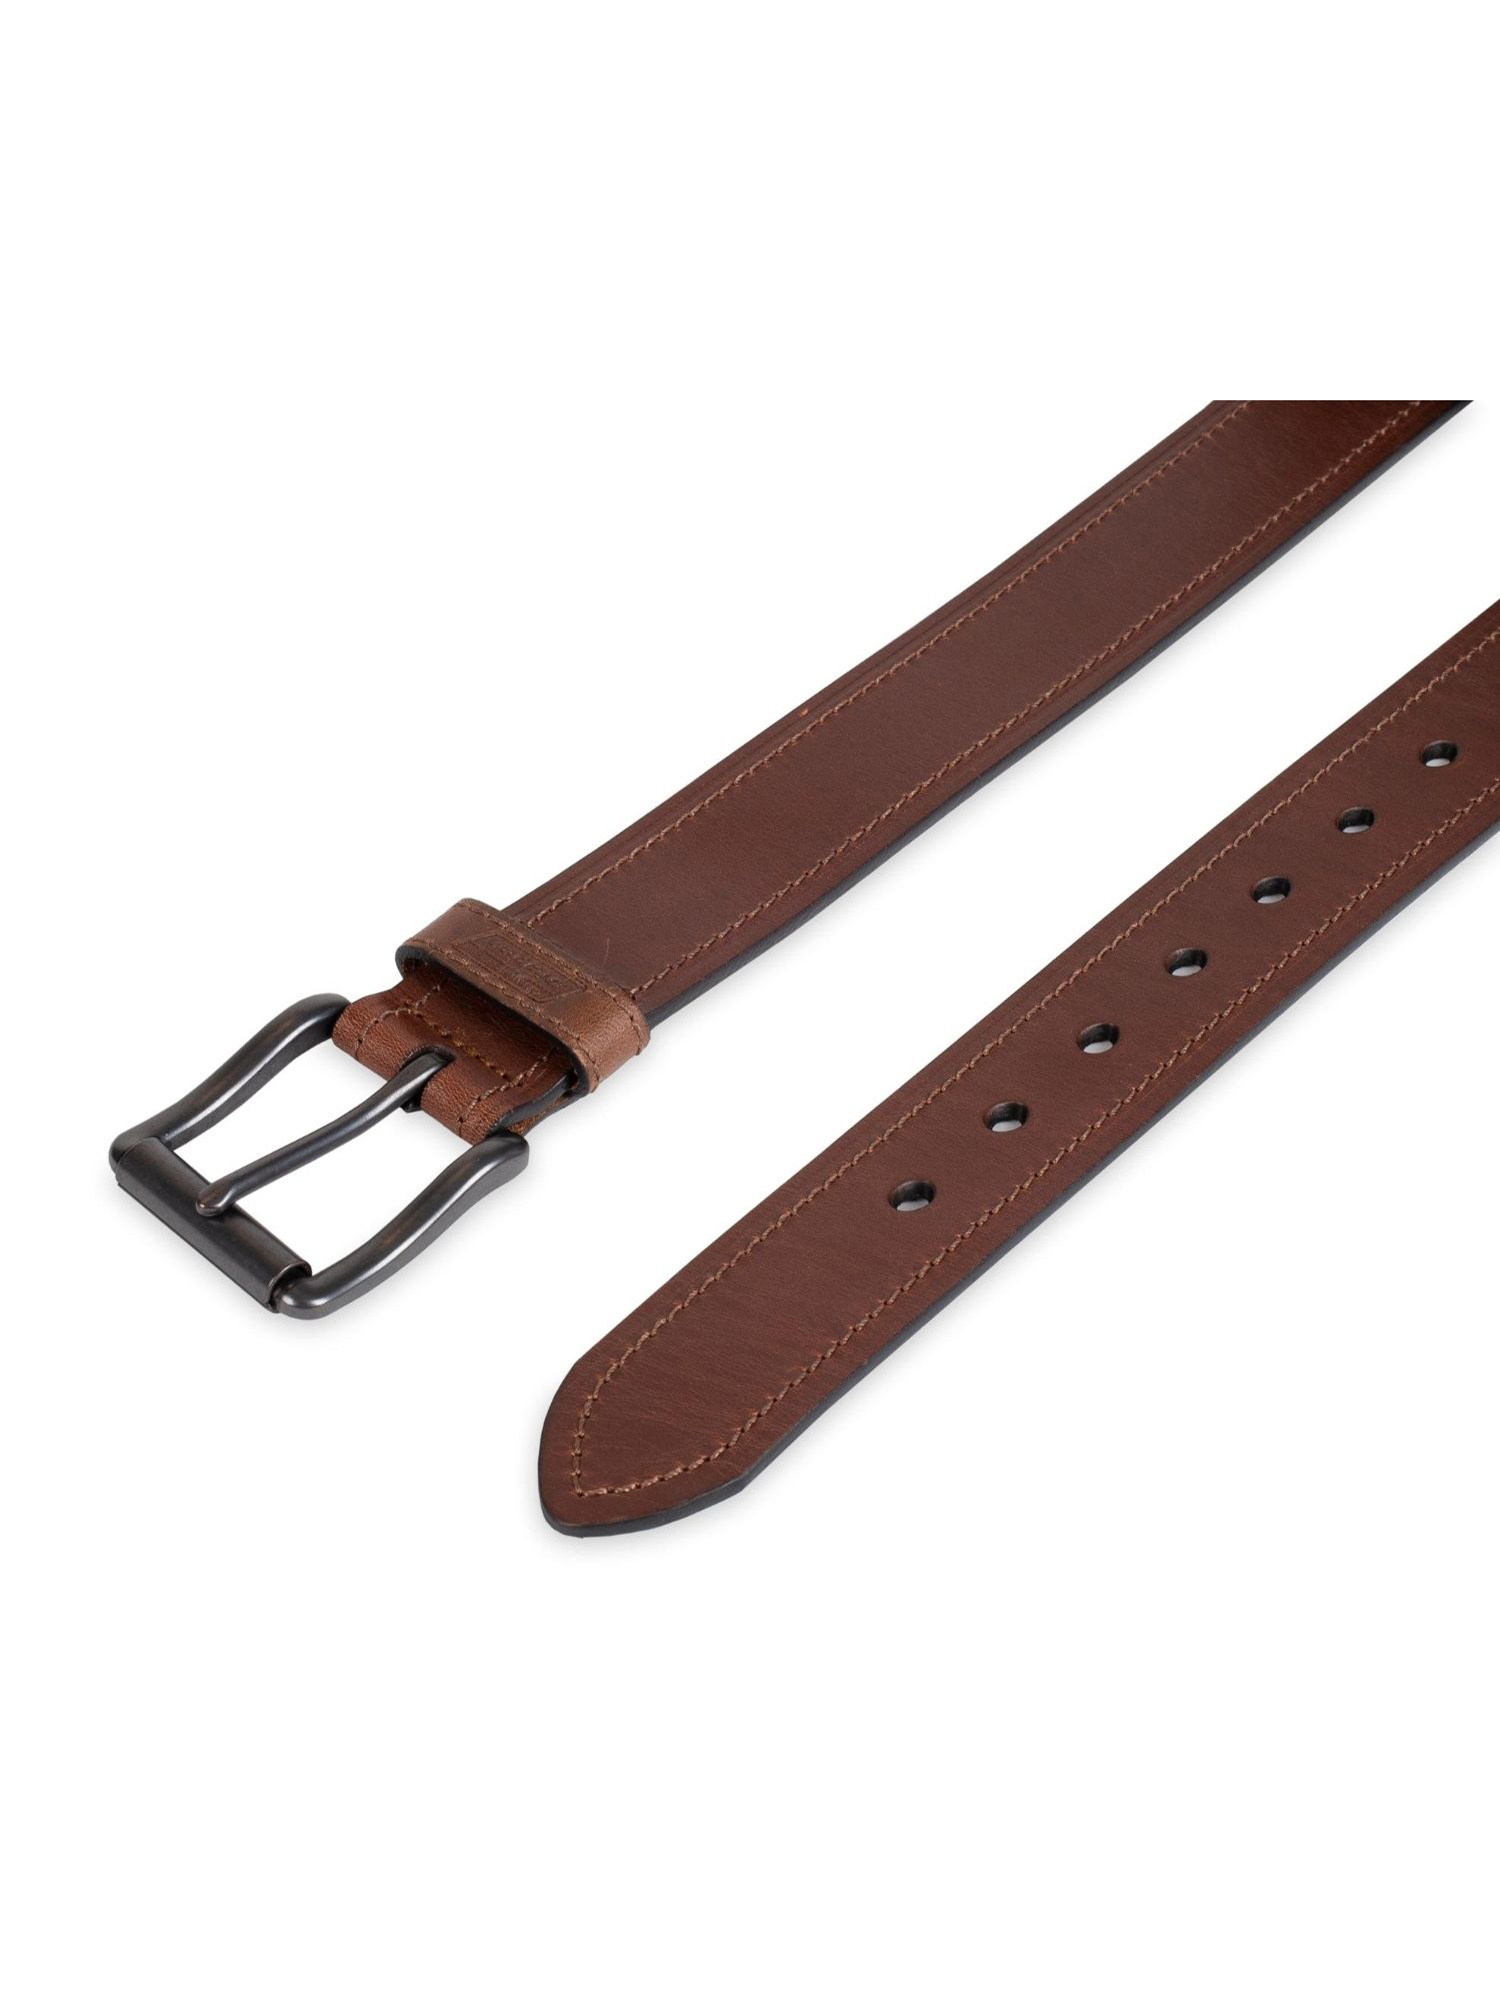 Genuine Dickies Men's Casual Brown Leather Work Belt with Roller Buckle (Regular and Big & Tall Sizes) - image 3 of 5